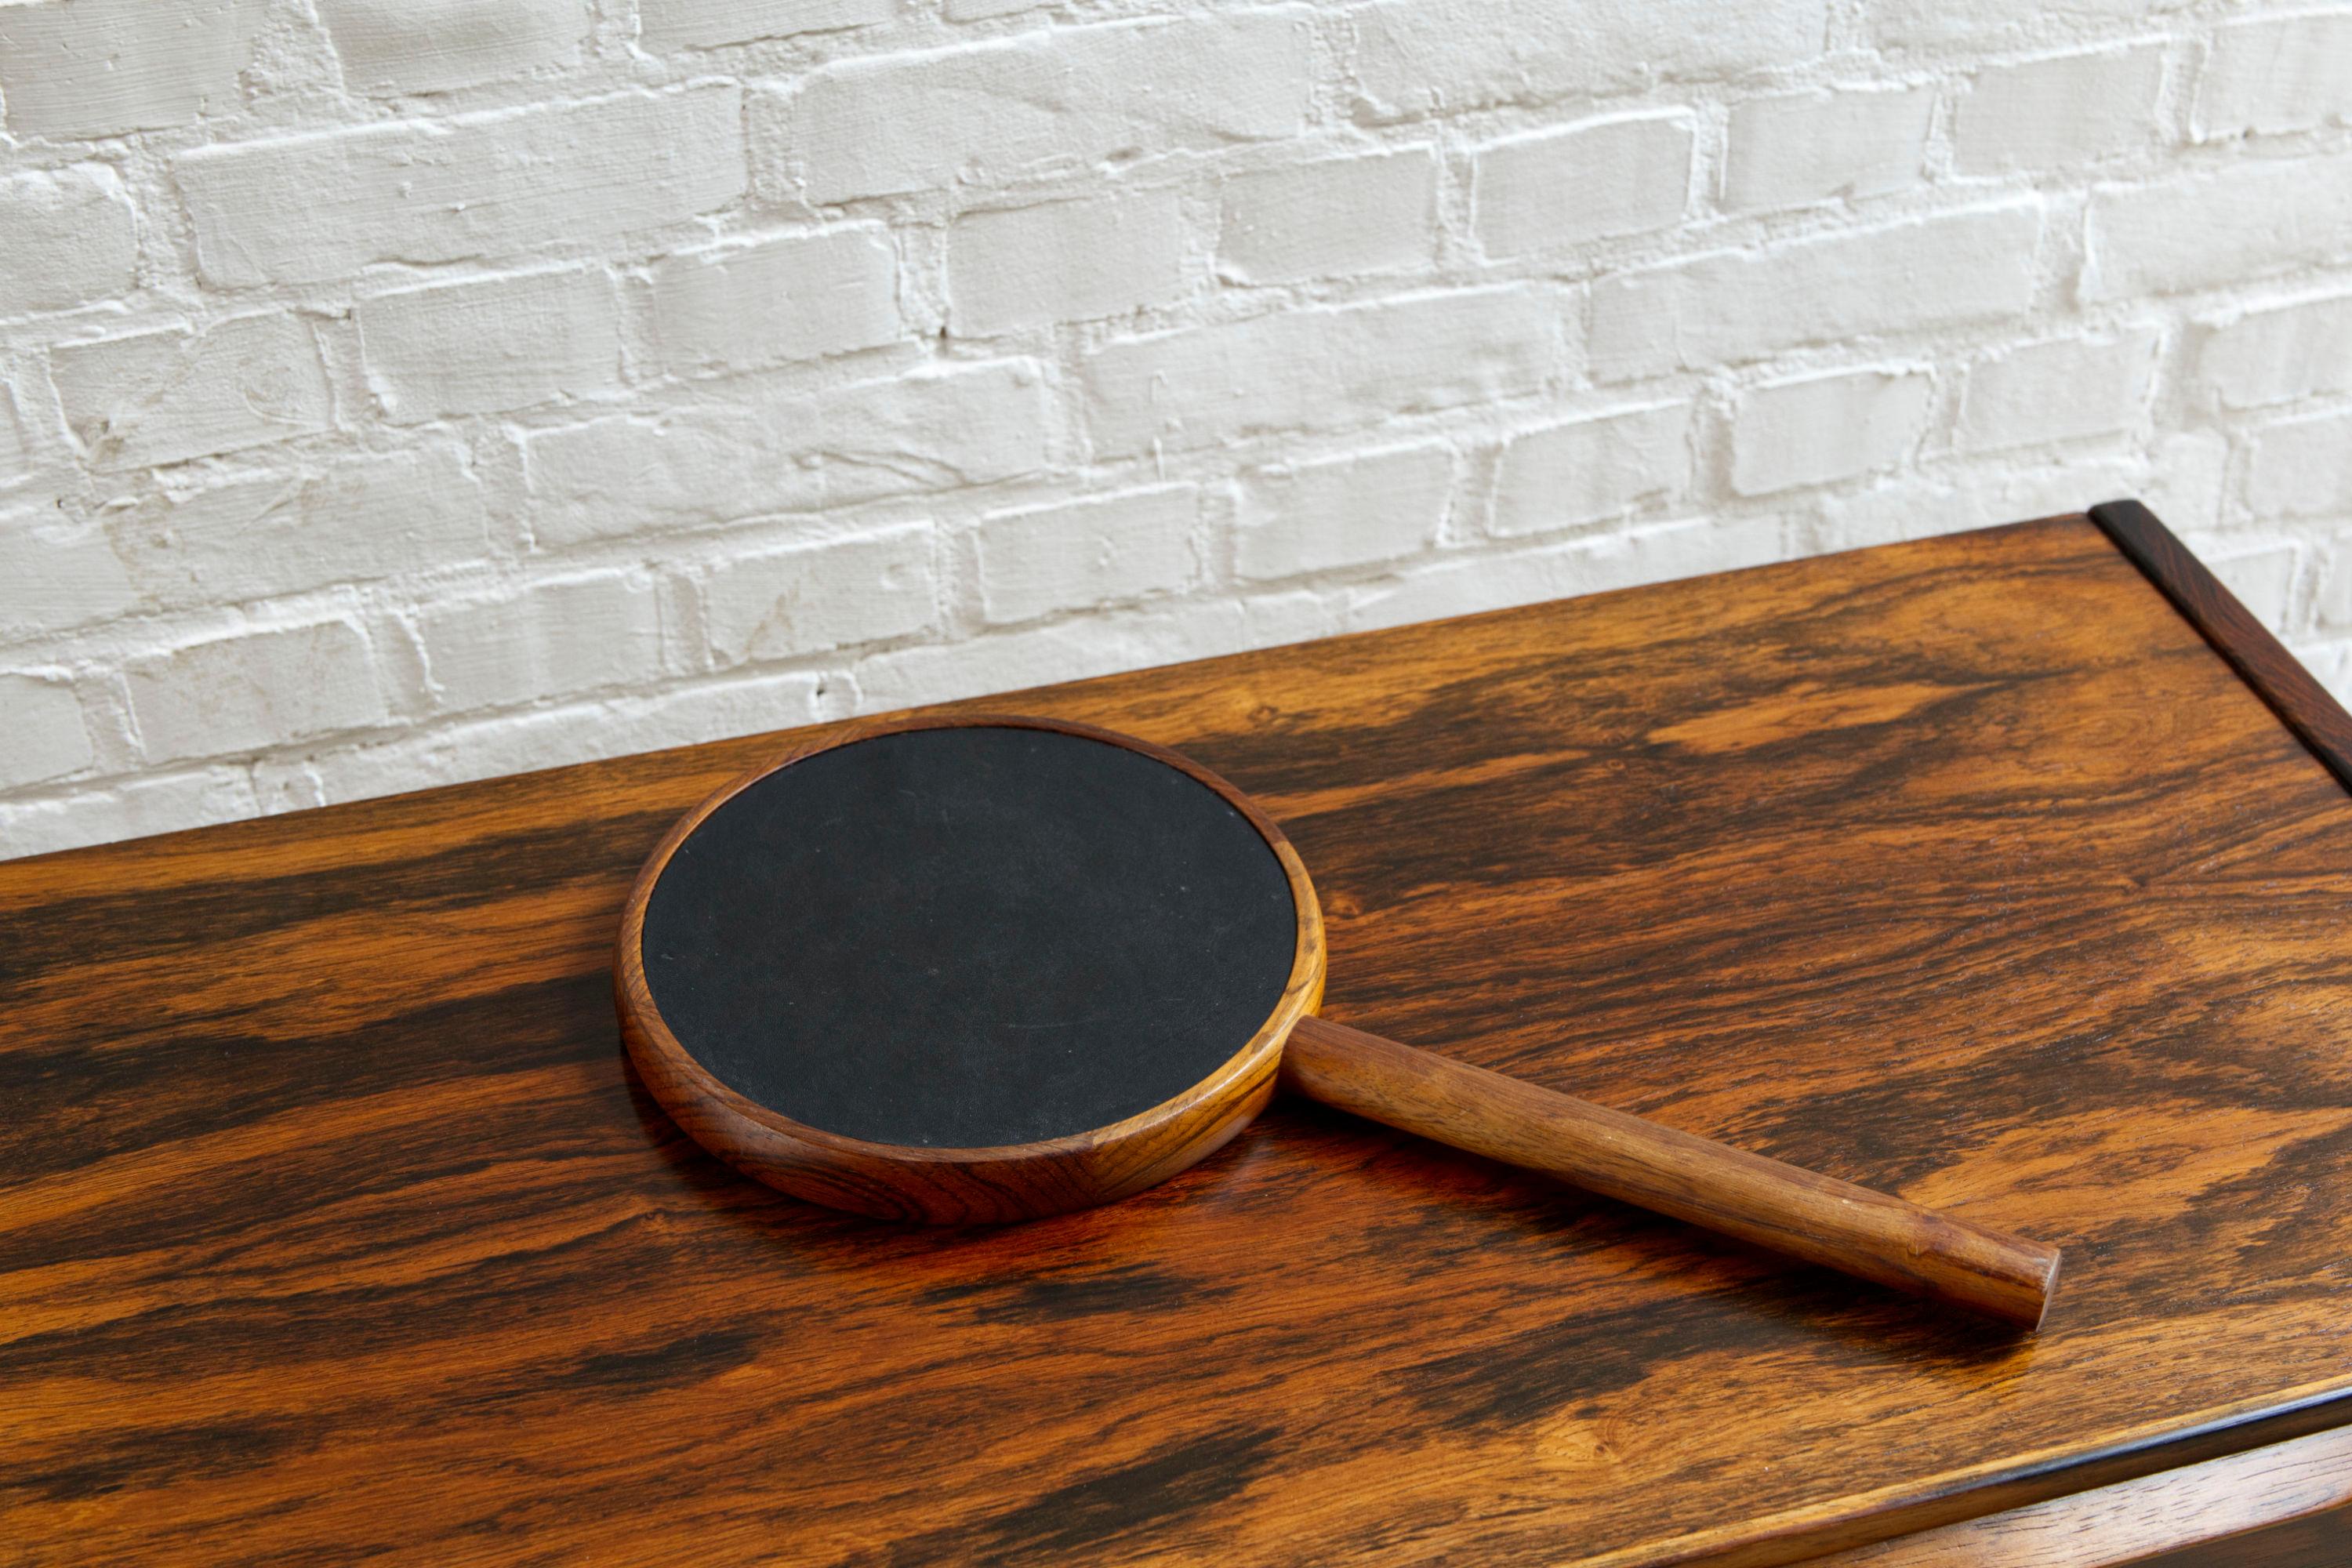 Mid-20th Century Rosewood Hand Mirror by Uno & Osten Kristiansson for Luxus, Sweden, 1950s For Sale